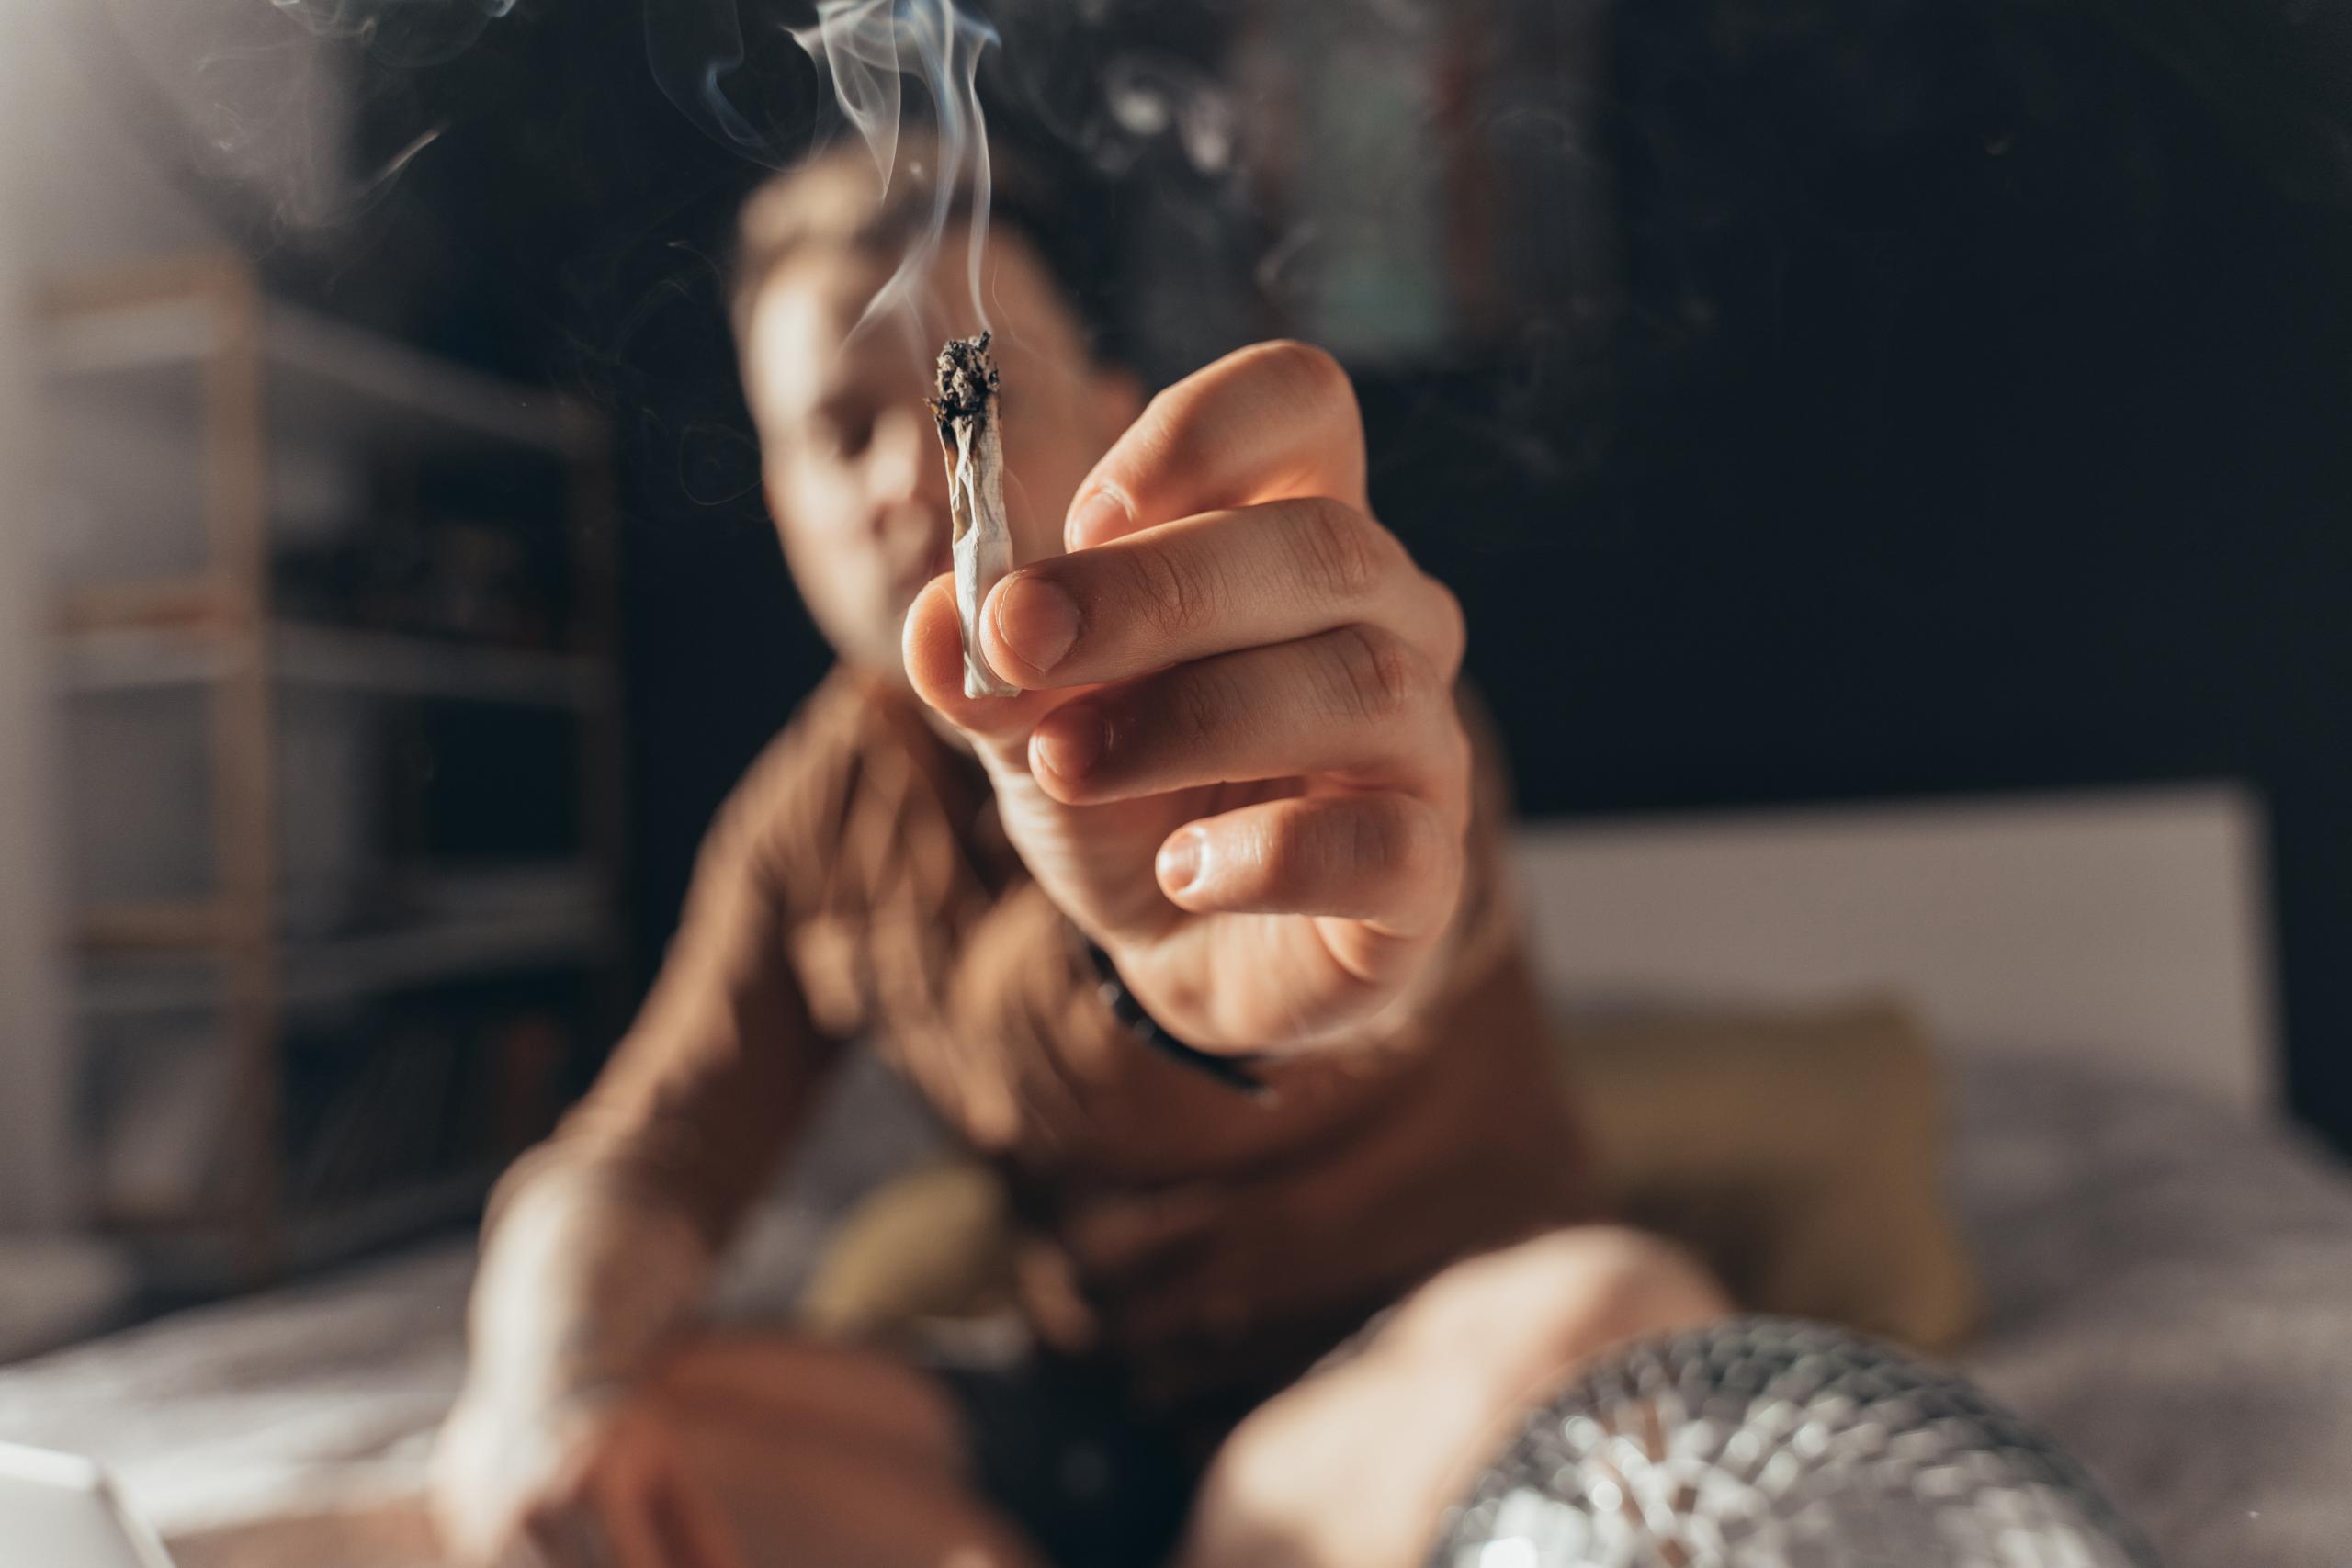 Take it. Close up view of the bearded man offering a hand rolled cannabis cigarette while sitting at the bed indoors. Focus at the cigarette with smoke